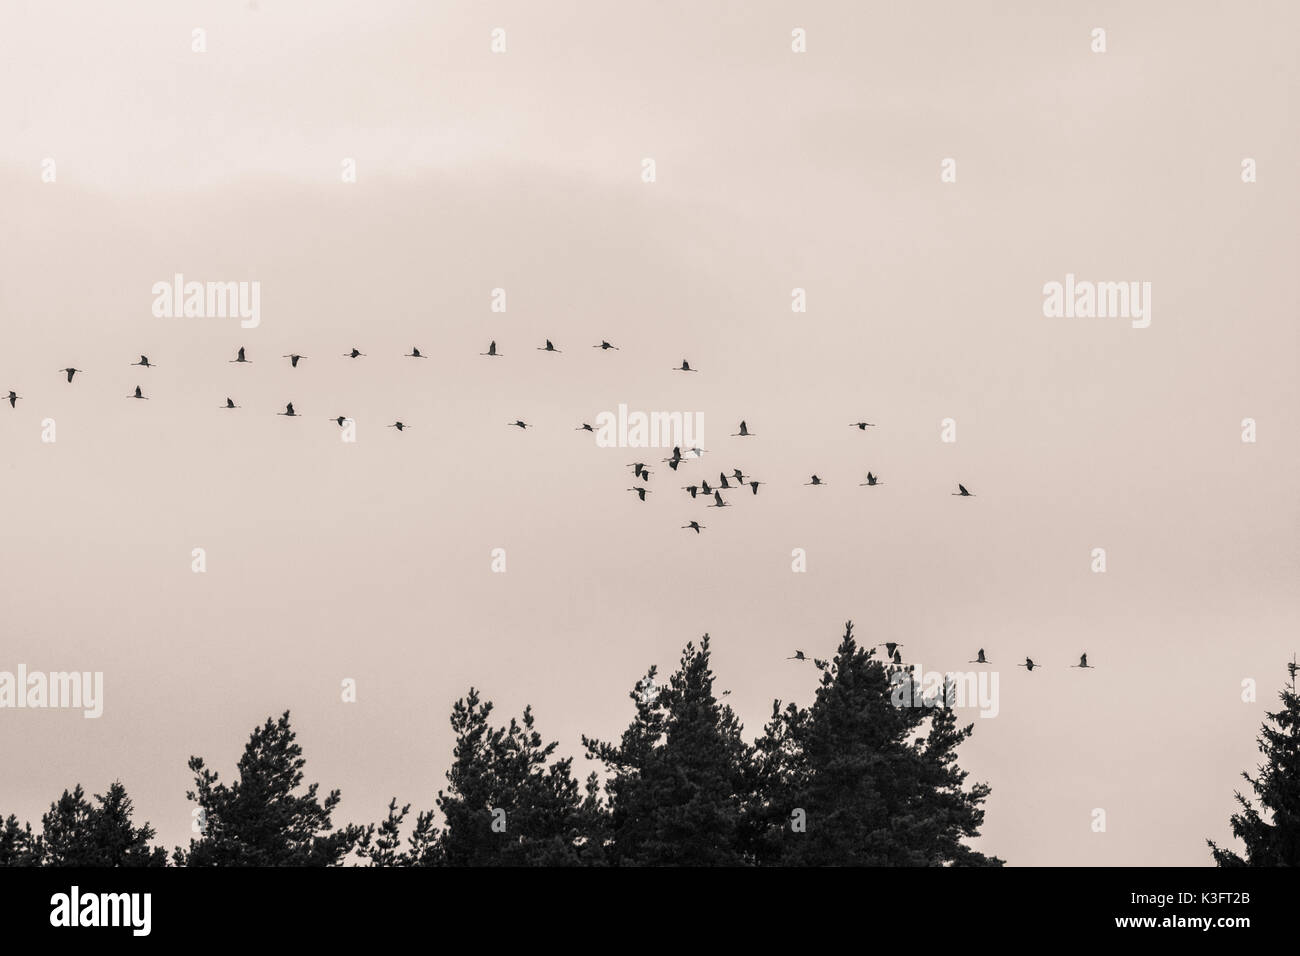 A beautiful formation of a migratory birds in autumn. Cranes flying to the south in fall. Monochrome photograph. Stock Photo